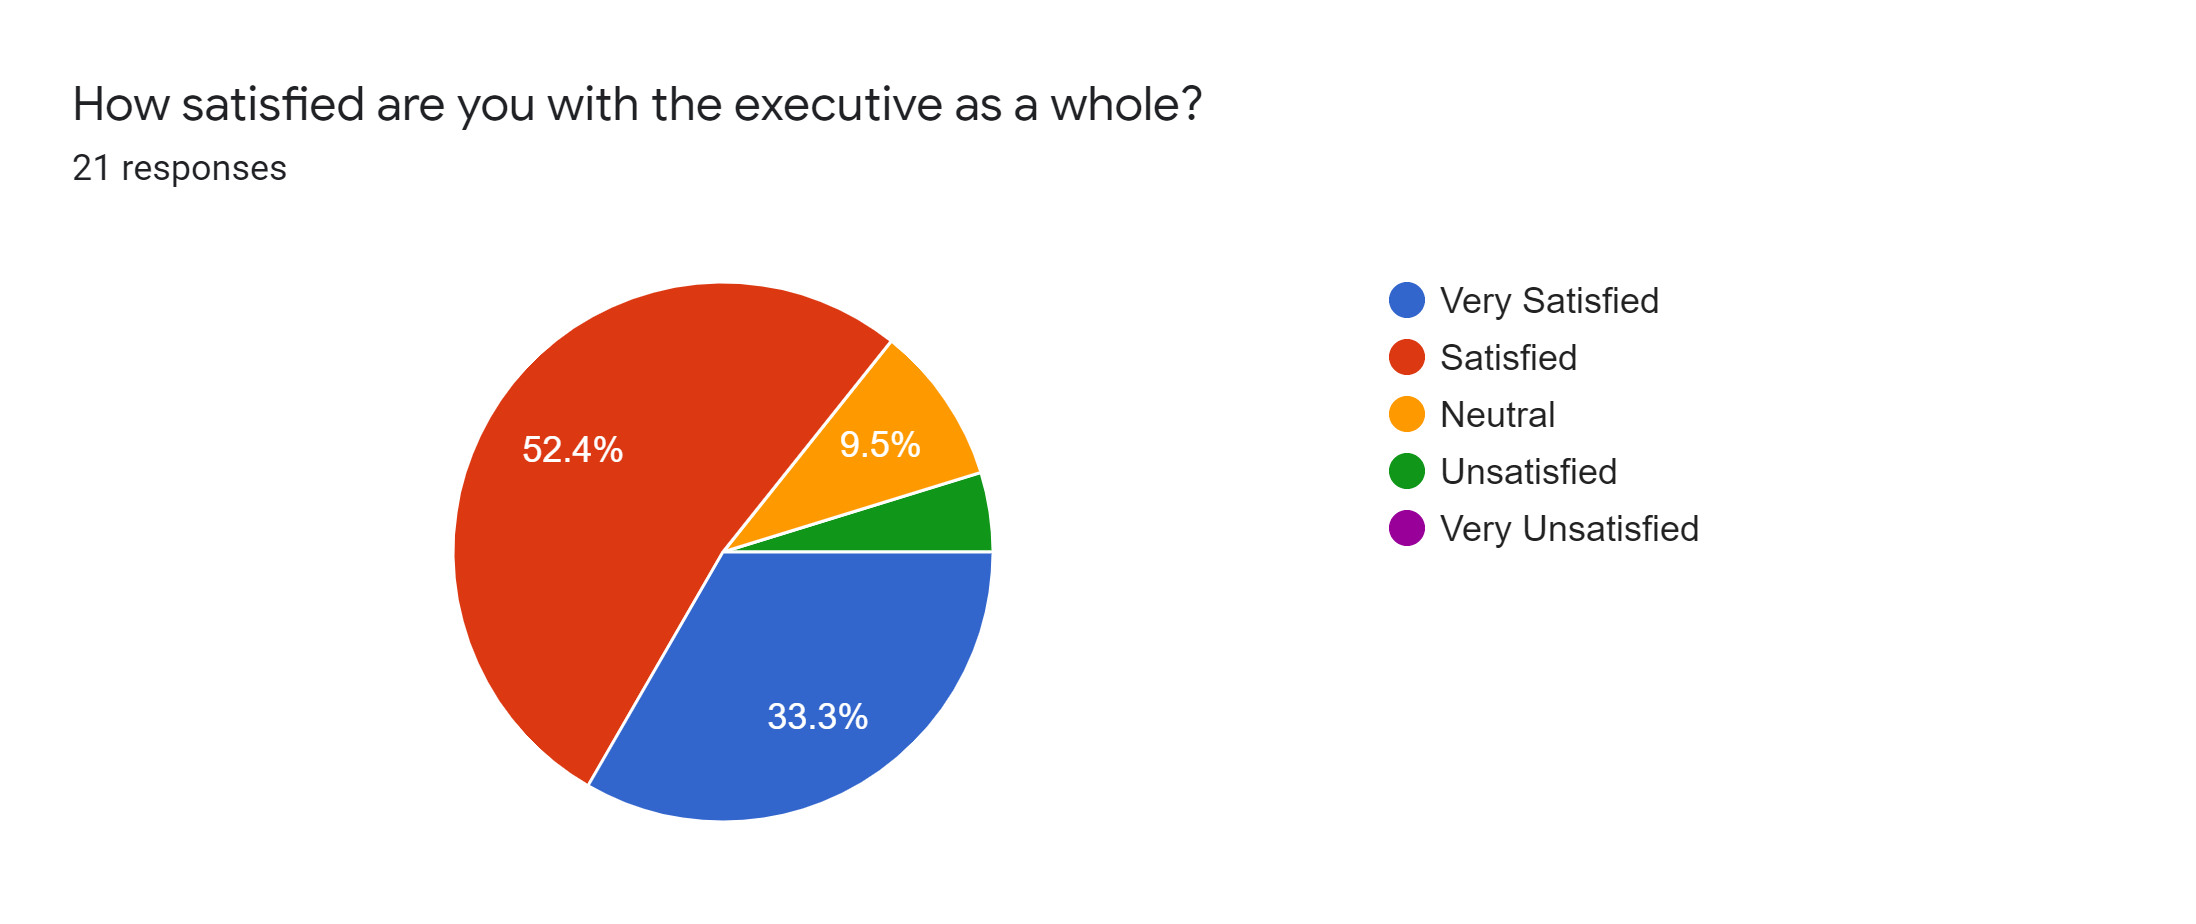 Forms response chart. Question title: How satisfied are you with the executive as a whole?. Number of responses: 21 responses.